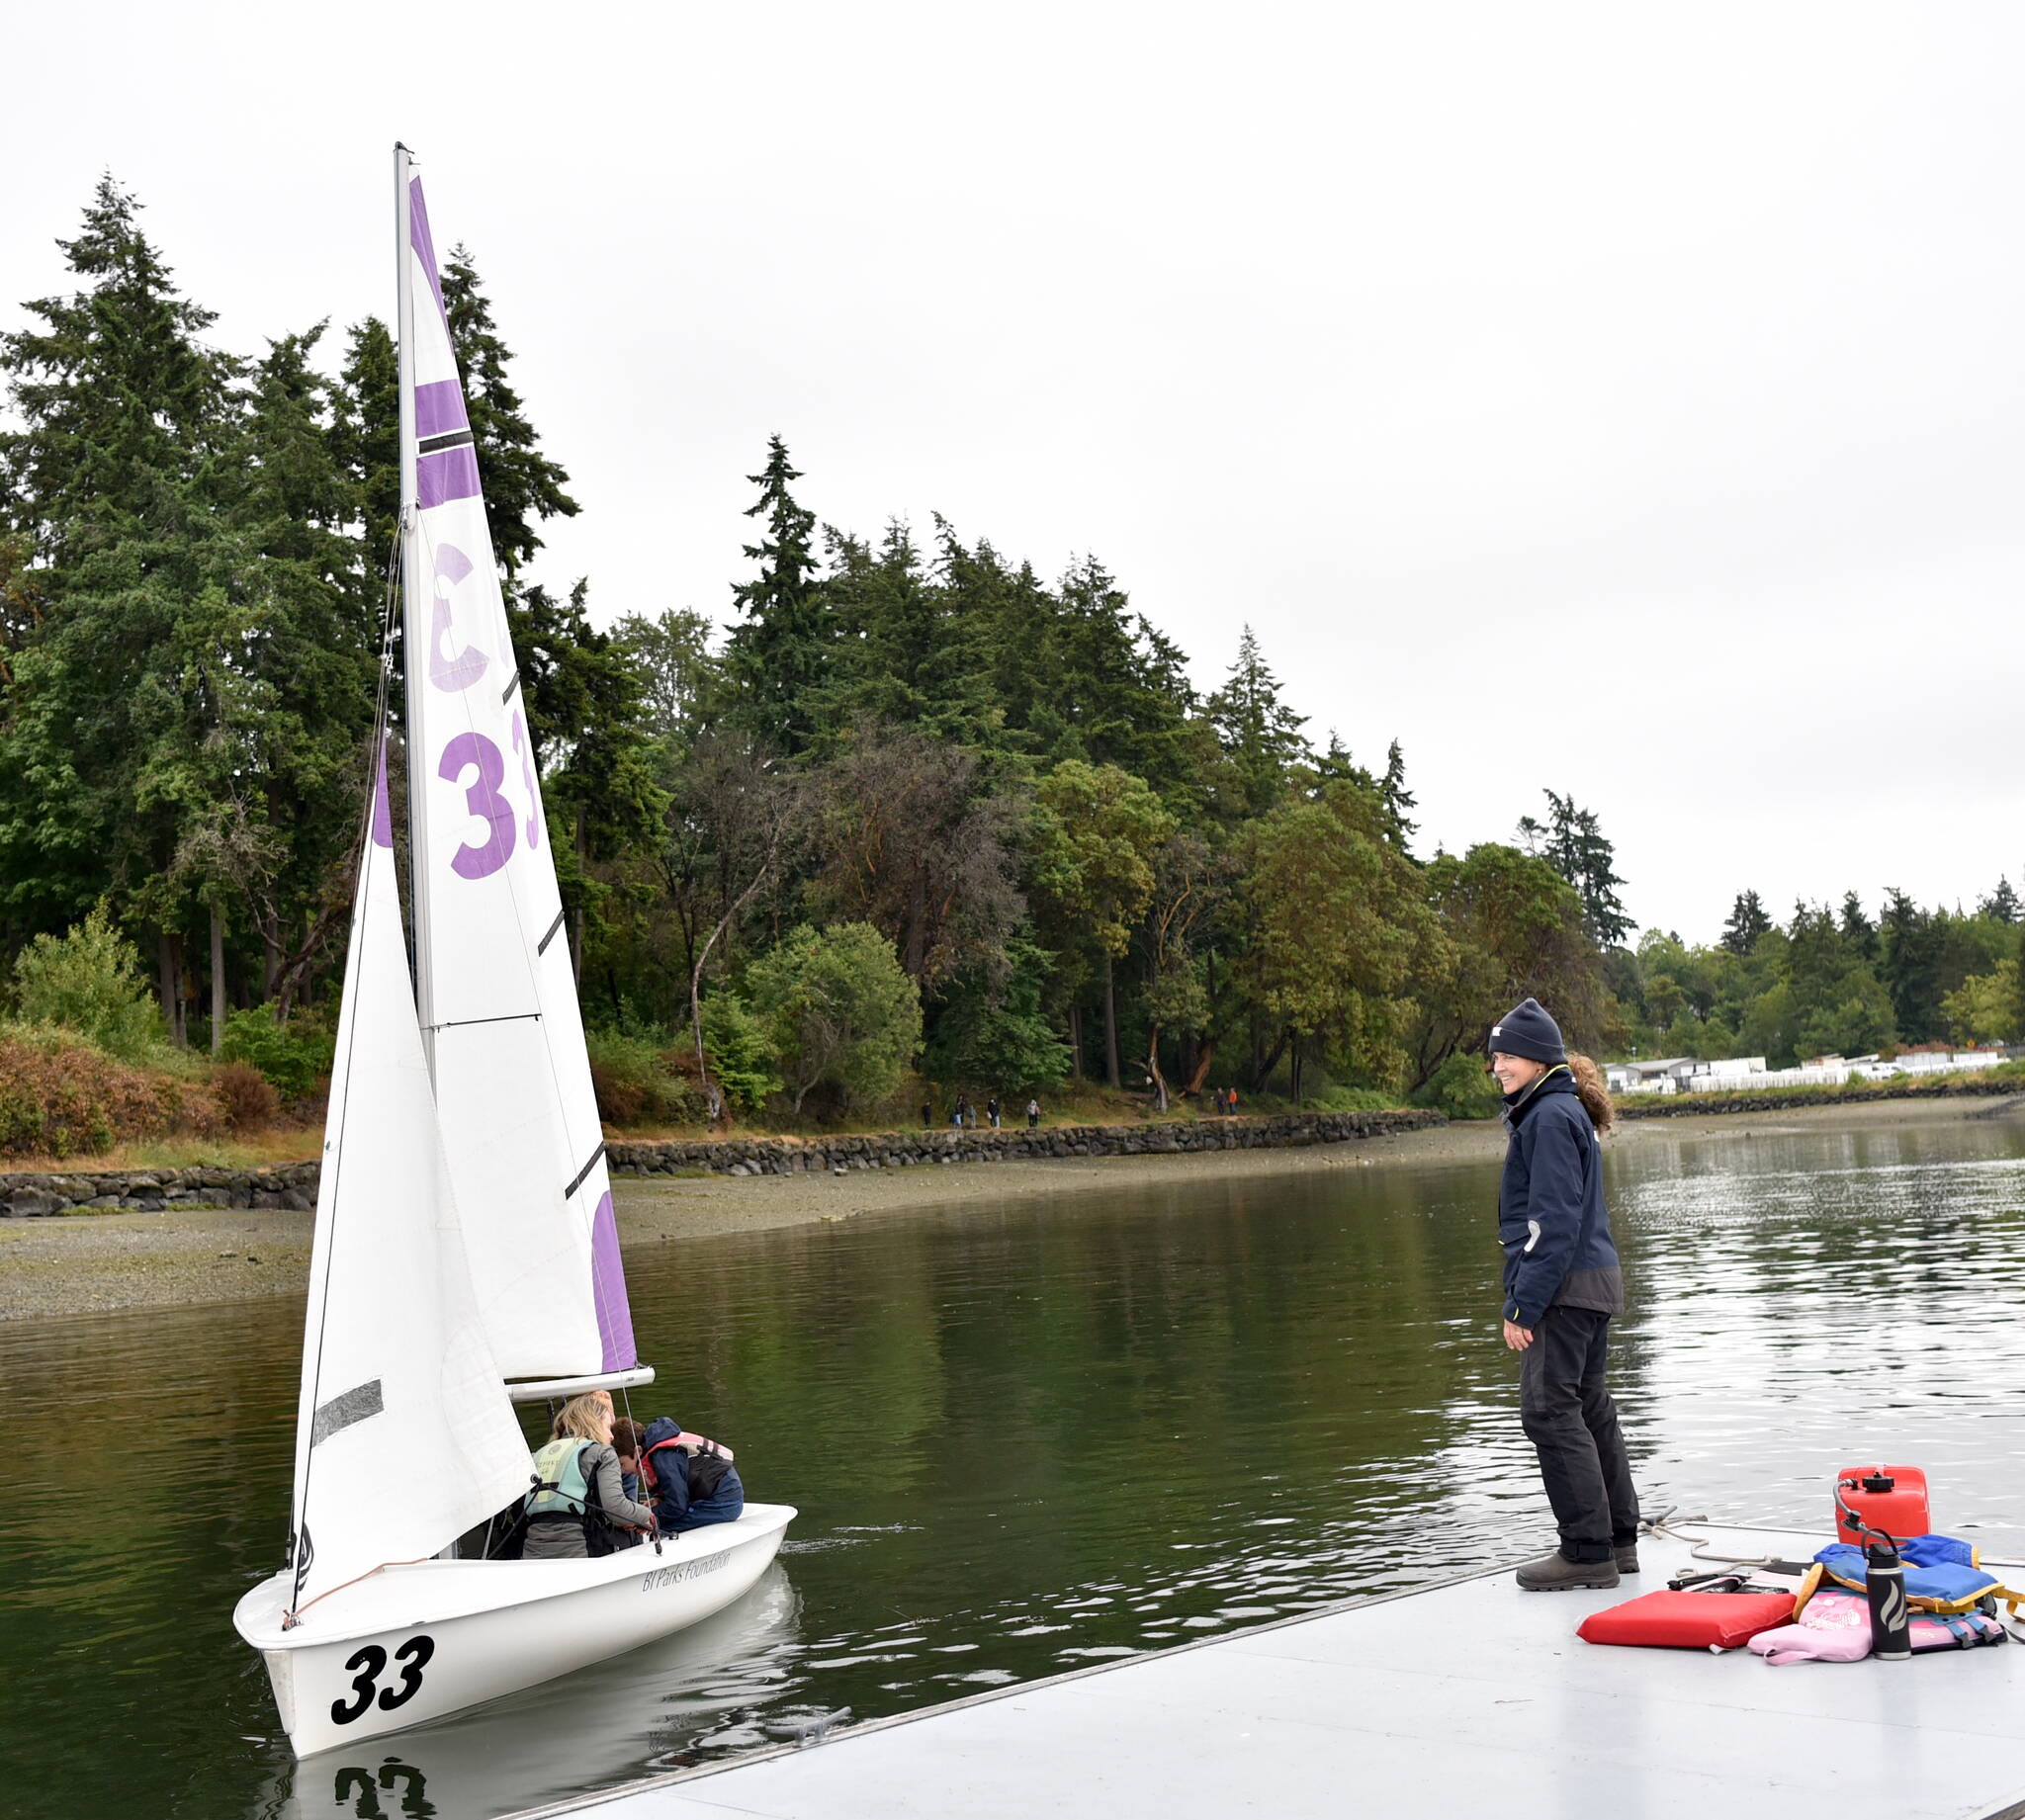 The Bainbridge Island Metro Parks & Recreation District offered rides in a sailboat.